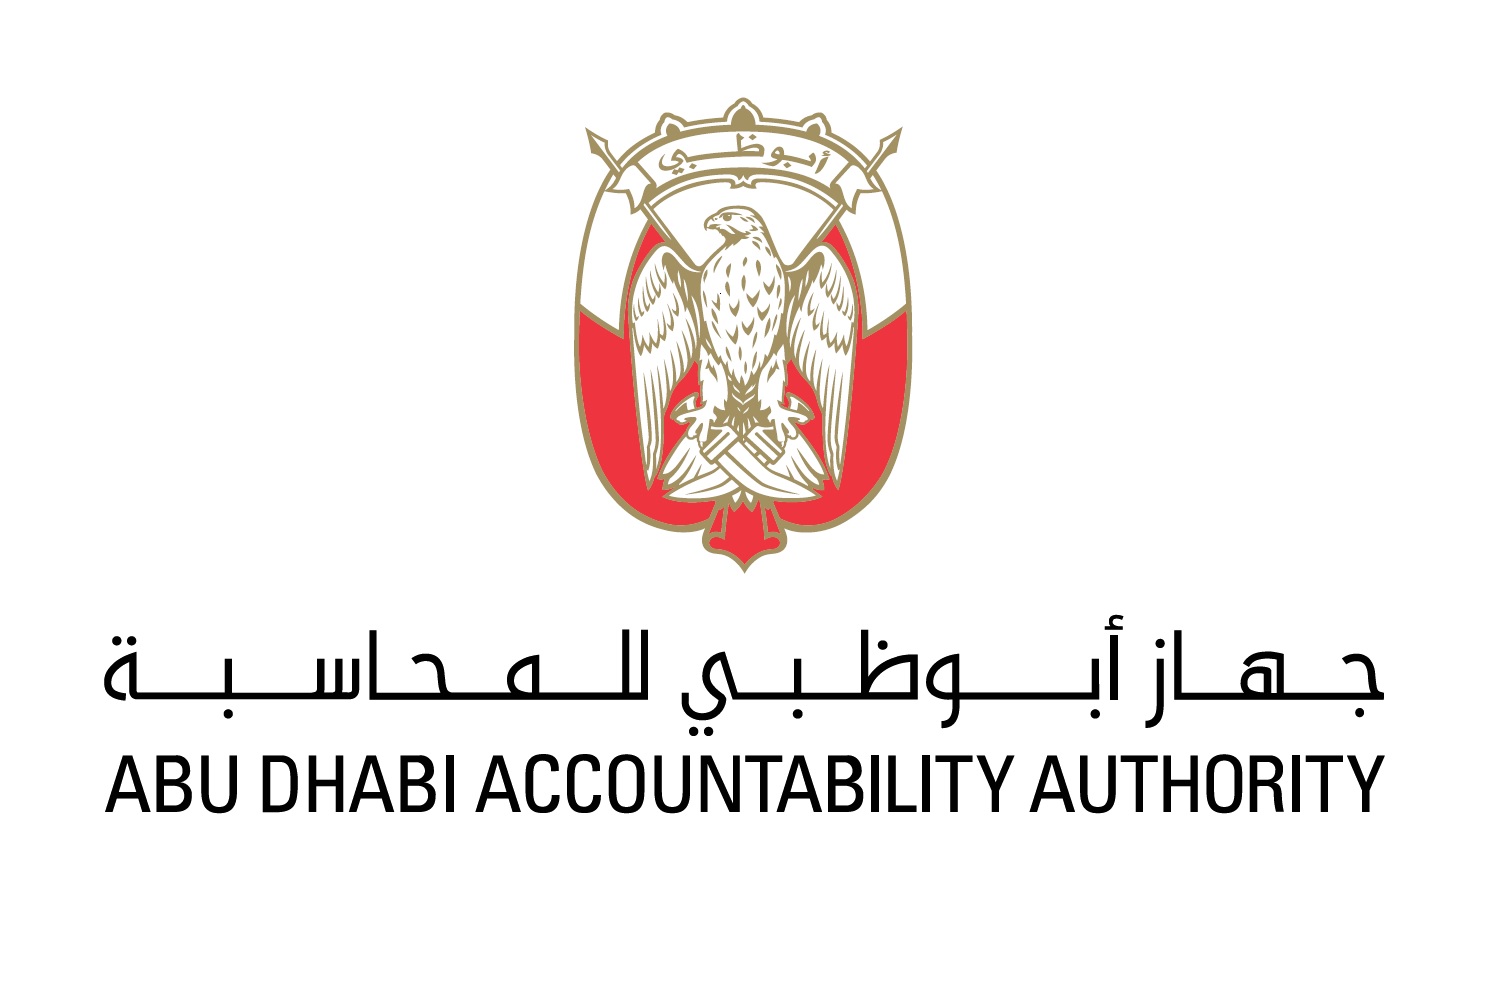 Abu Dhabi Accountability Authority launches "Conversations in Preserving Public Funds" initiative